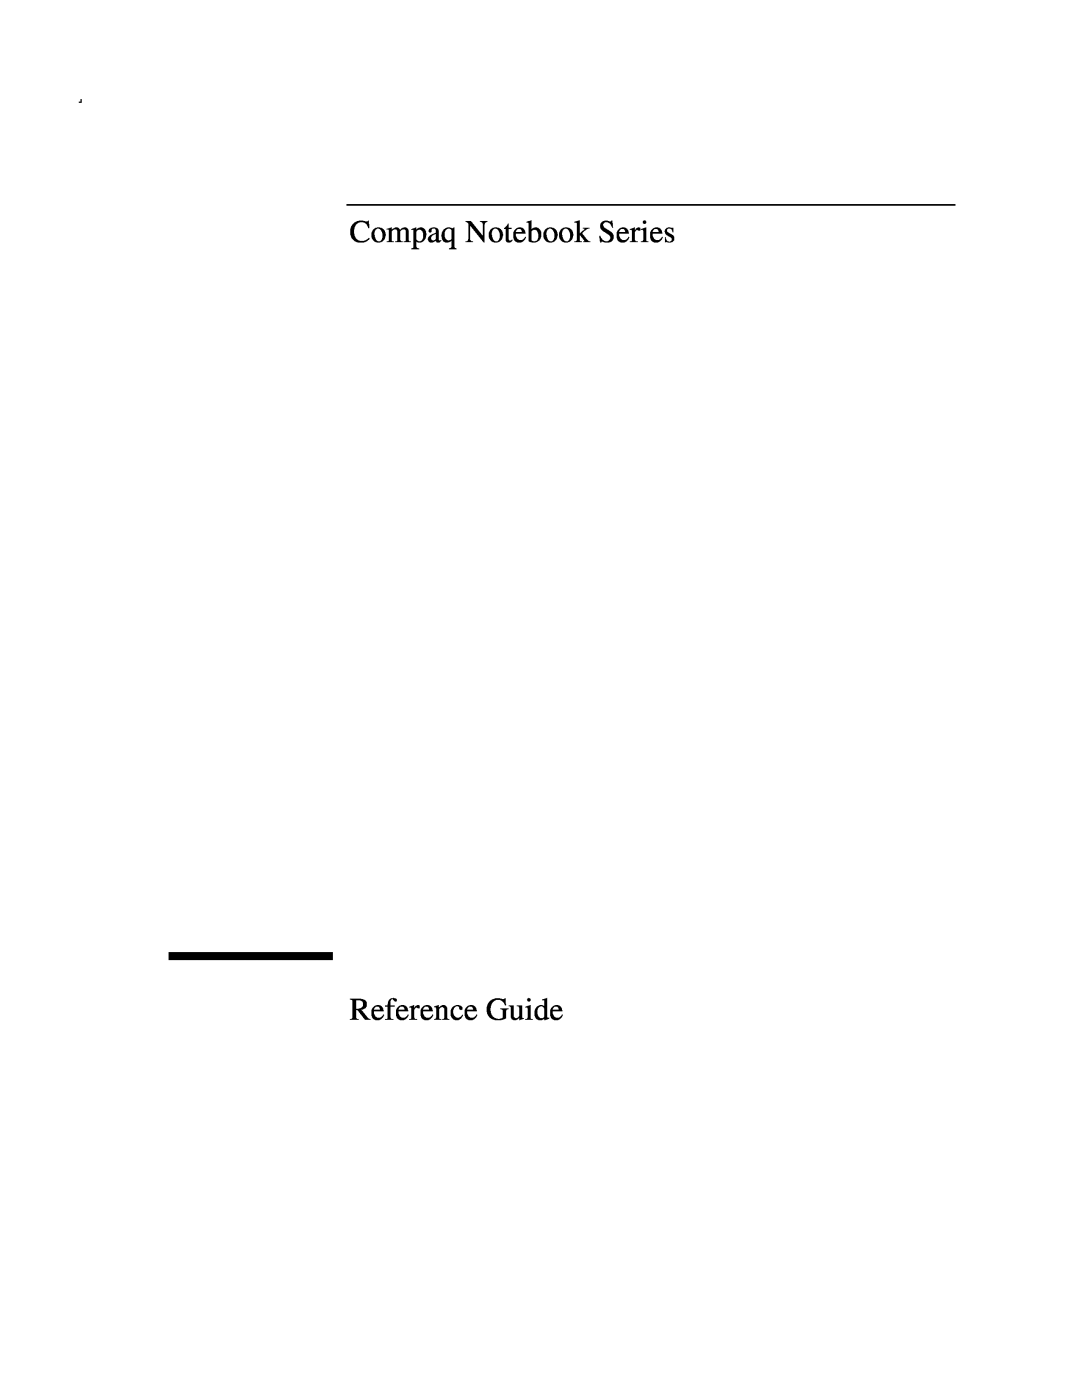 Compaq AMC20493-KT5 manual Compaq Notebook Series, Reference Guide 